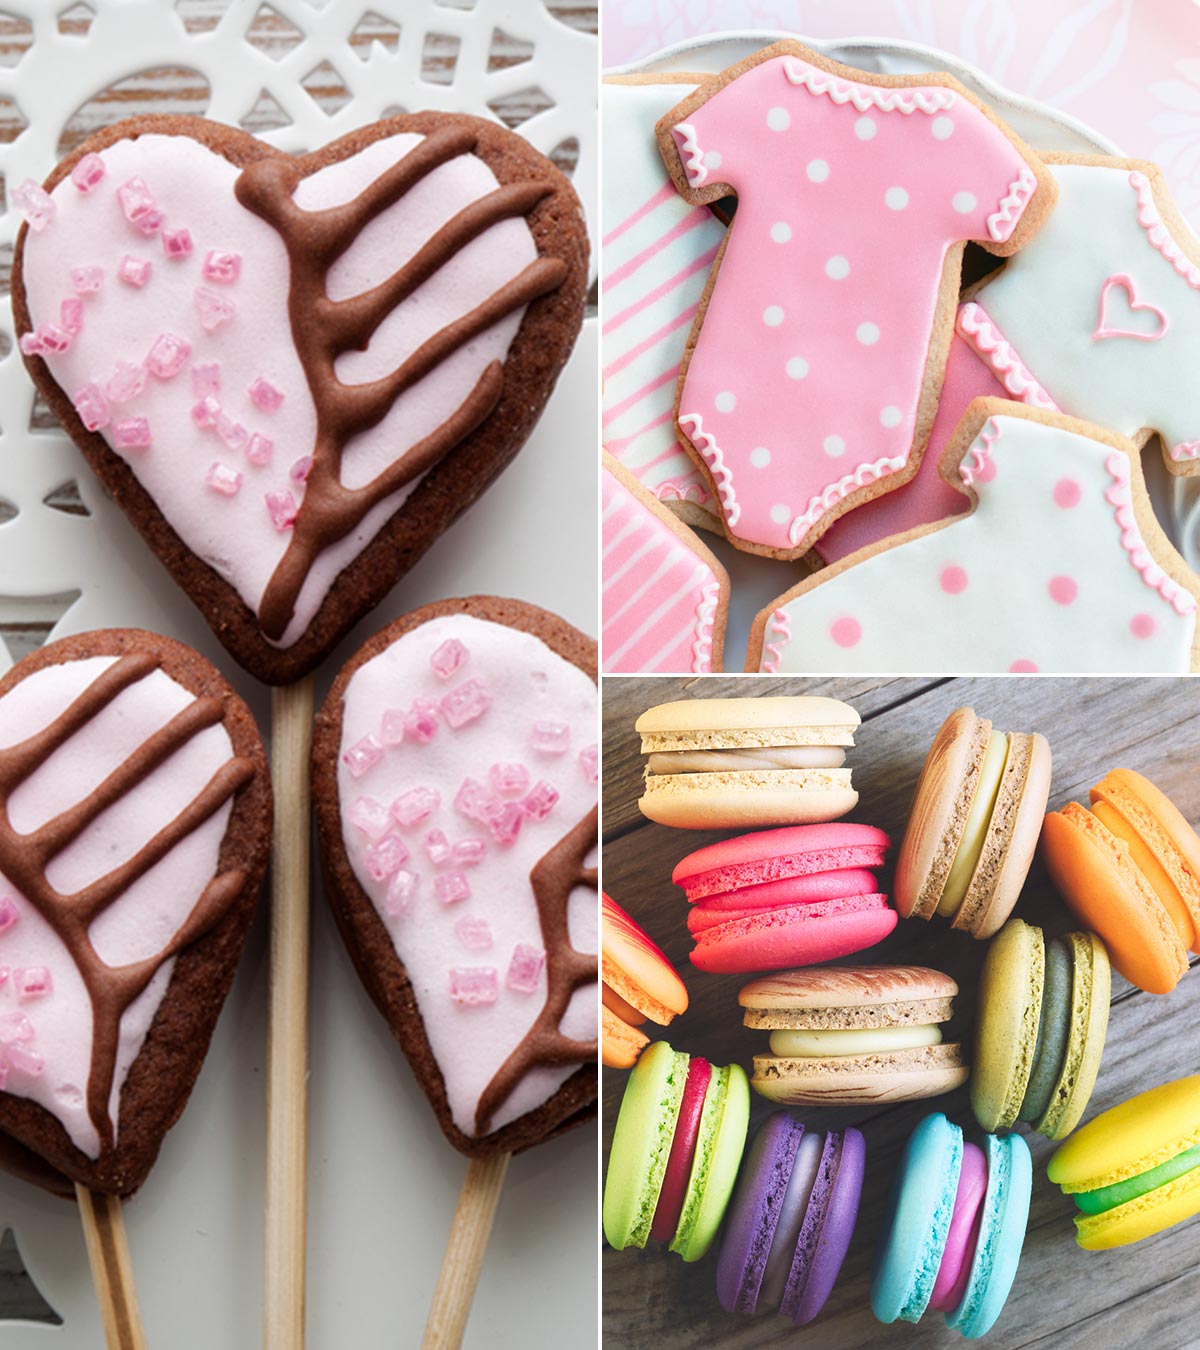 10 Mouth-Watering Recipes For Baby Shower Cookies